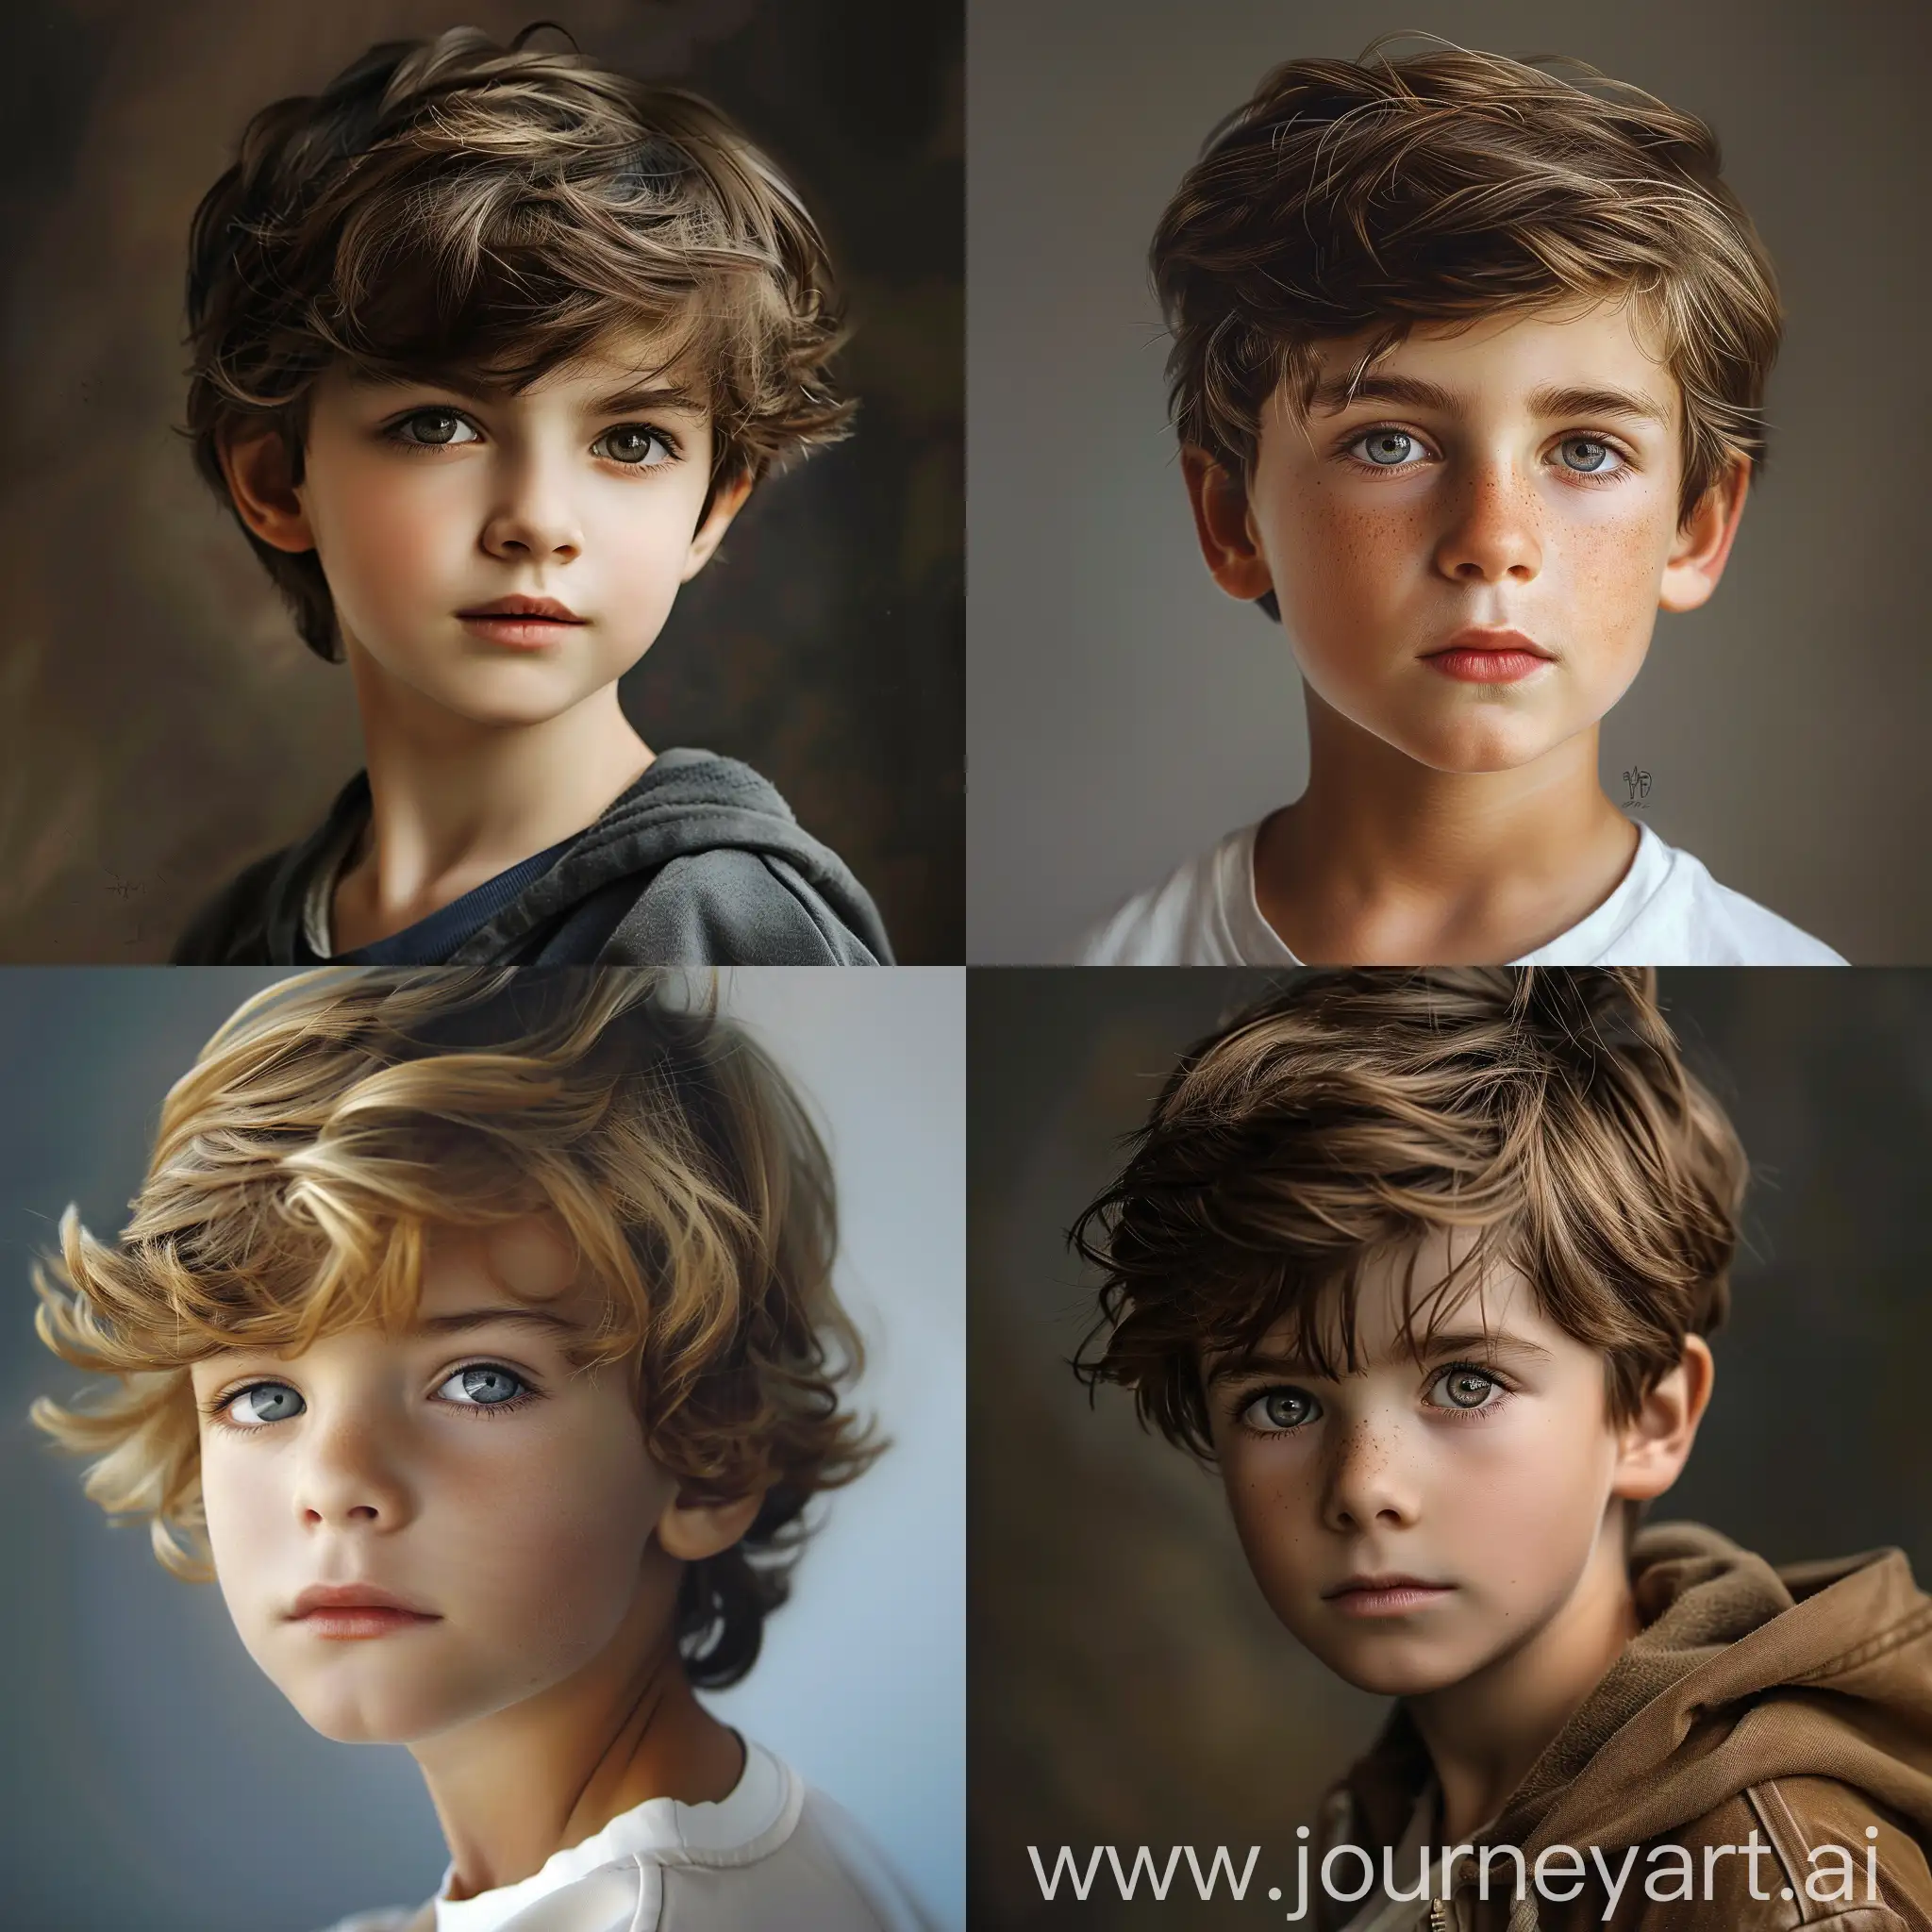 Captivating-Portrait-of-a-Handsome-Boy-in-Stunning-HD-Realism